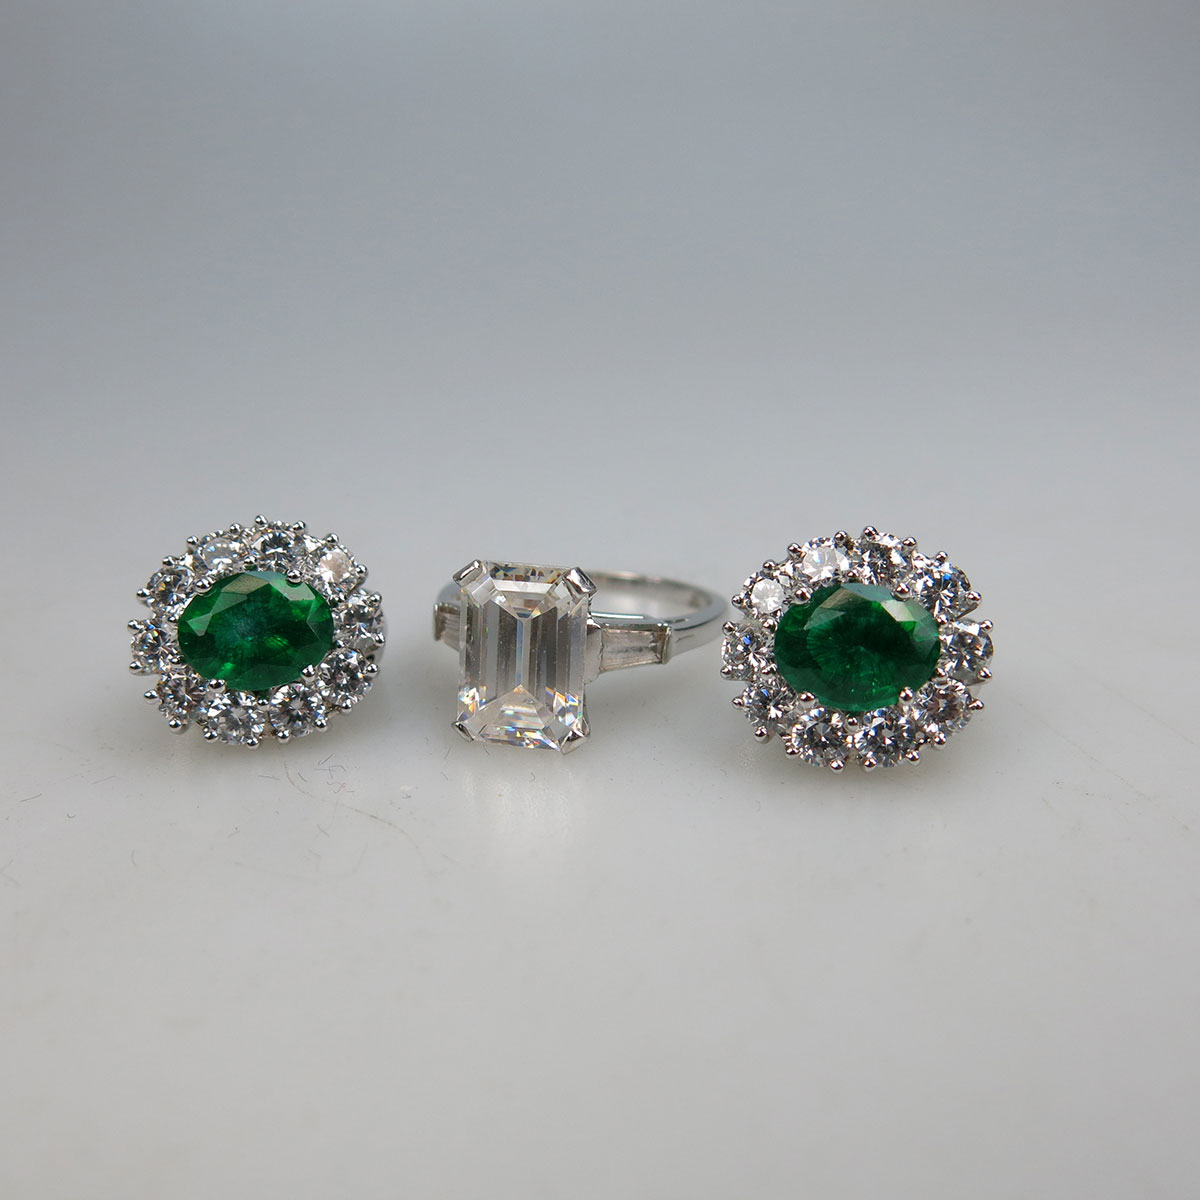 Pair Of 14k White Gold Earrings And A 14k White Gold Ring